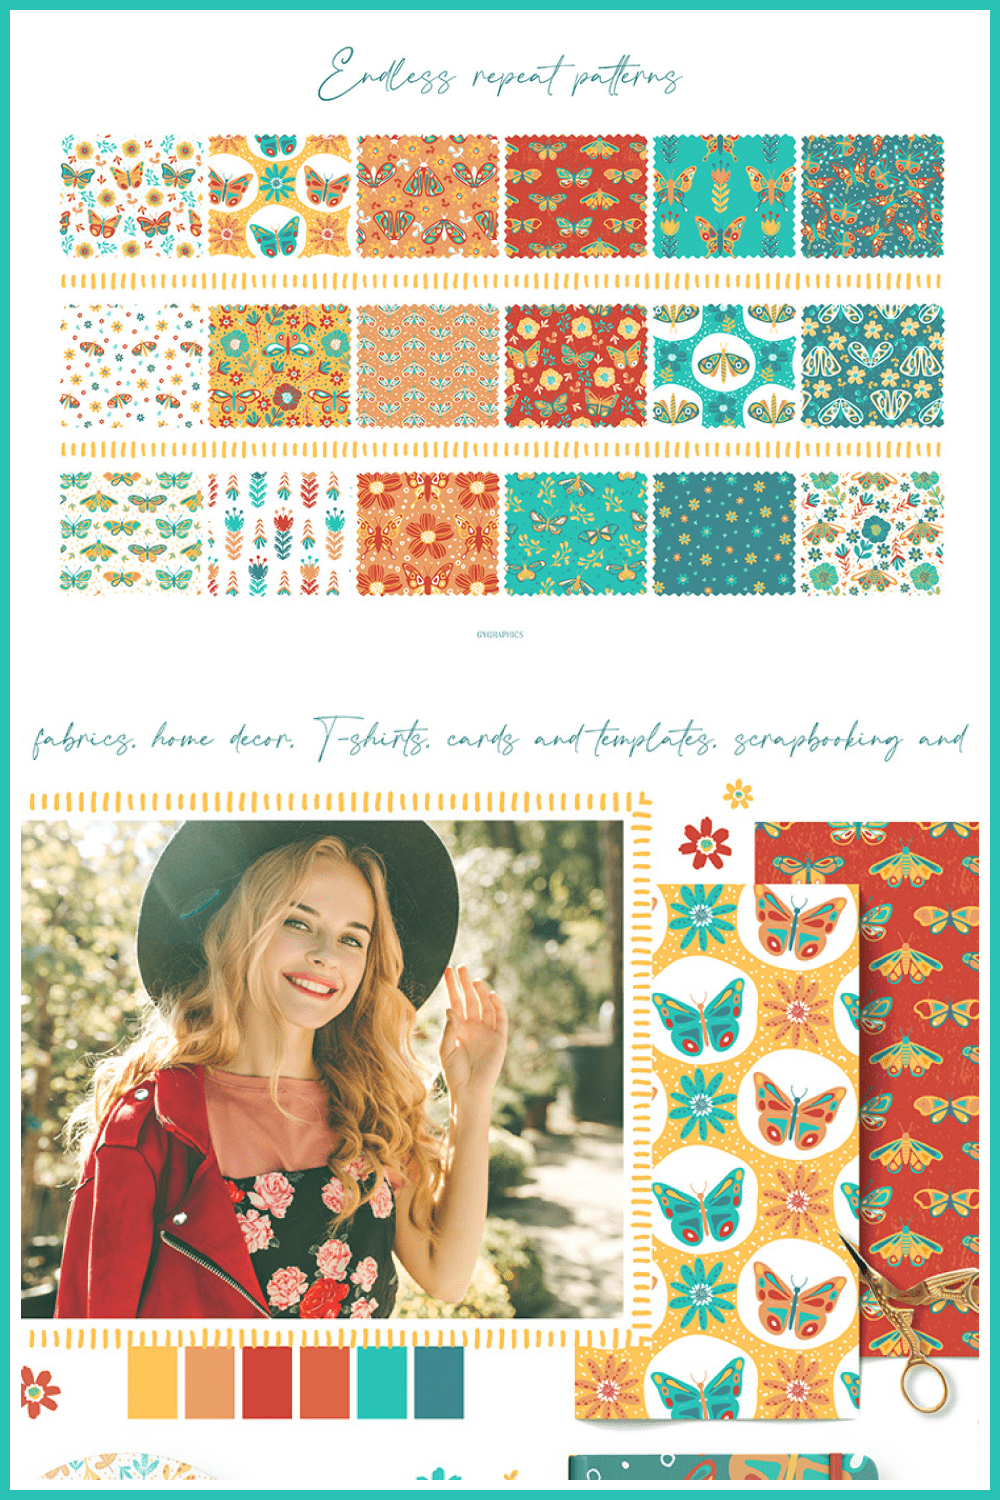 Butterflies in the Meadow Vector Patterns - MasterBundles - Pinterest Collage Image.